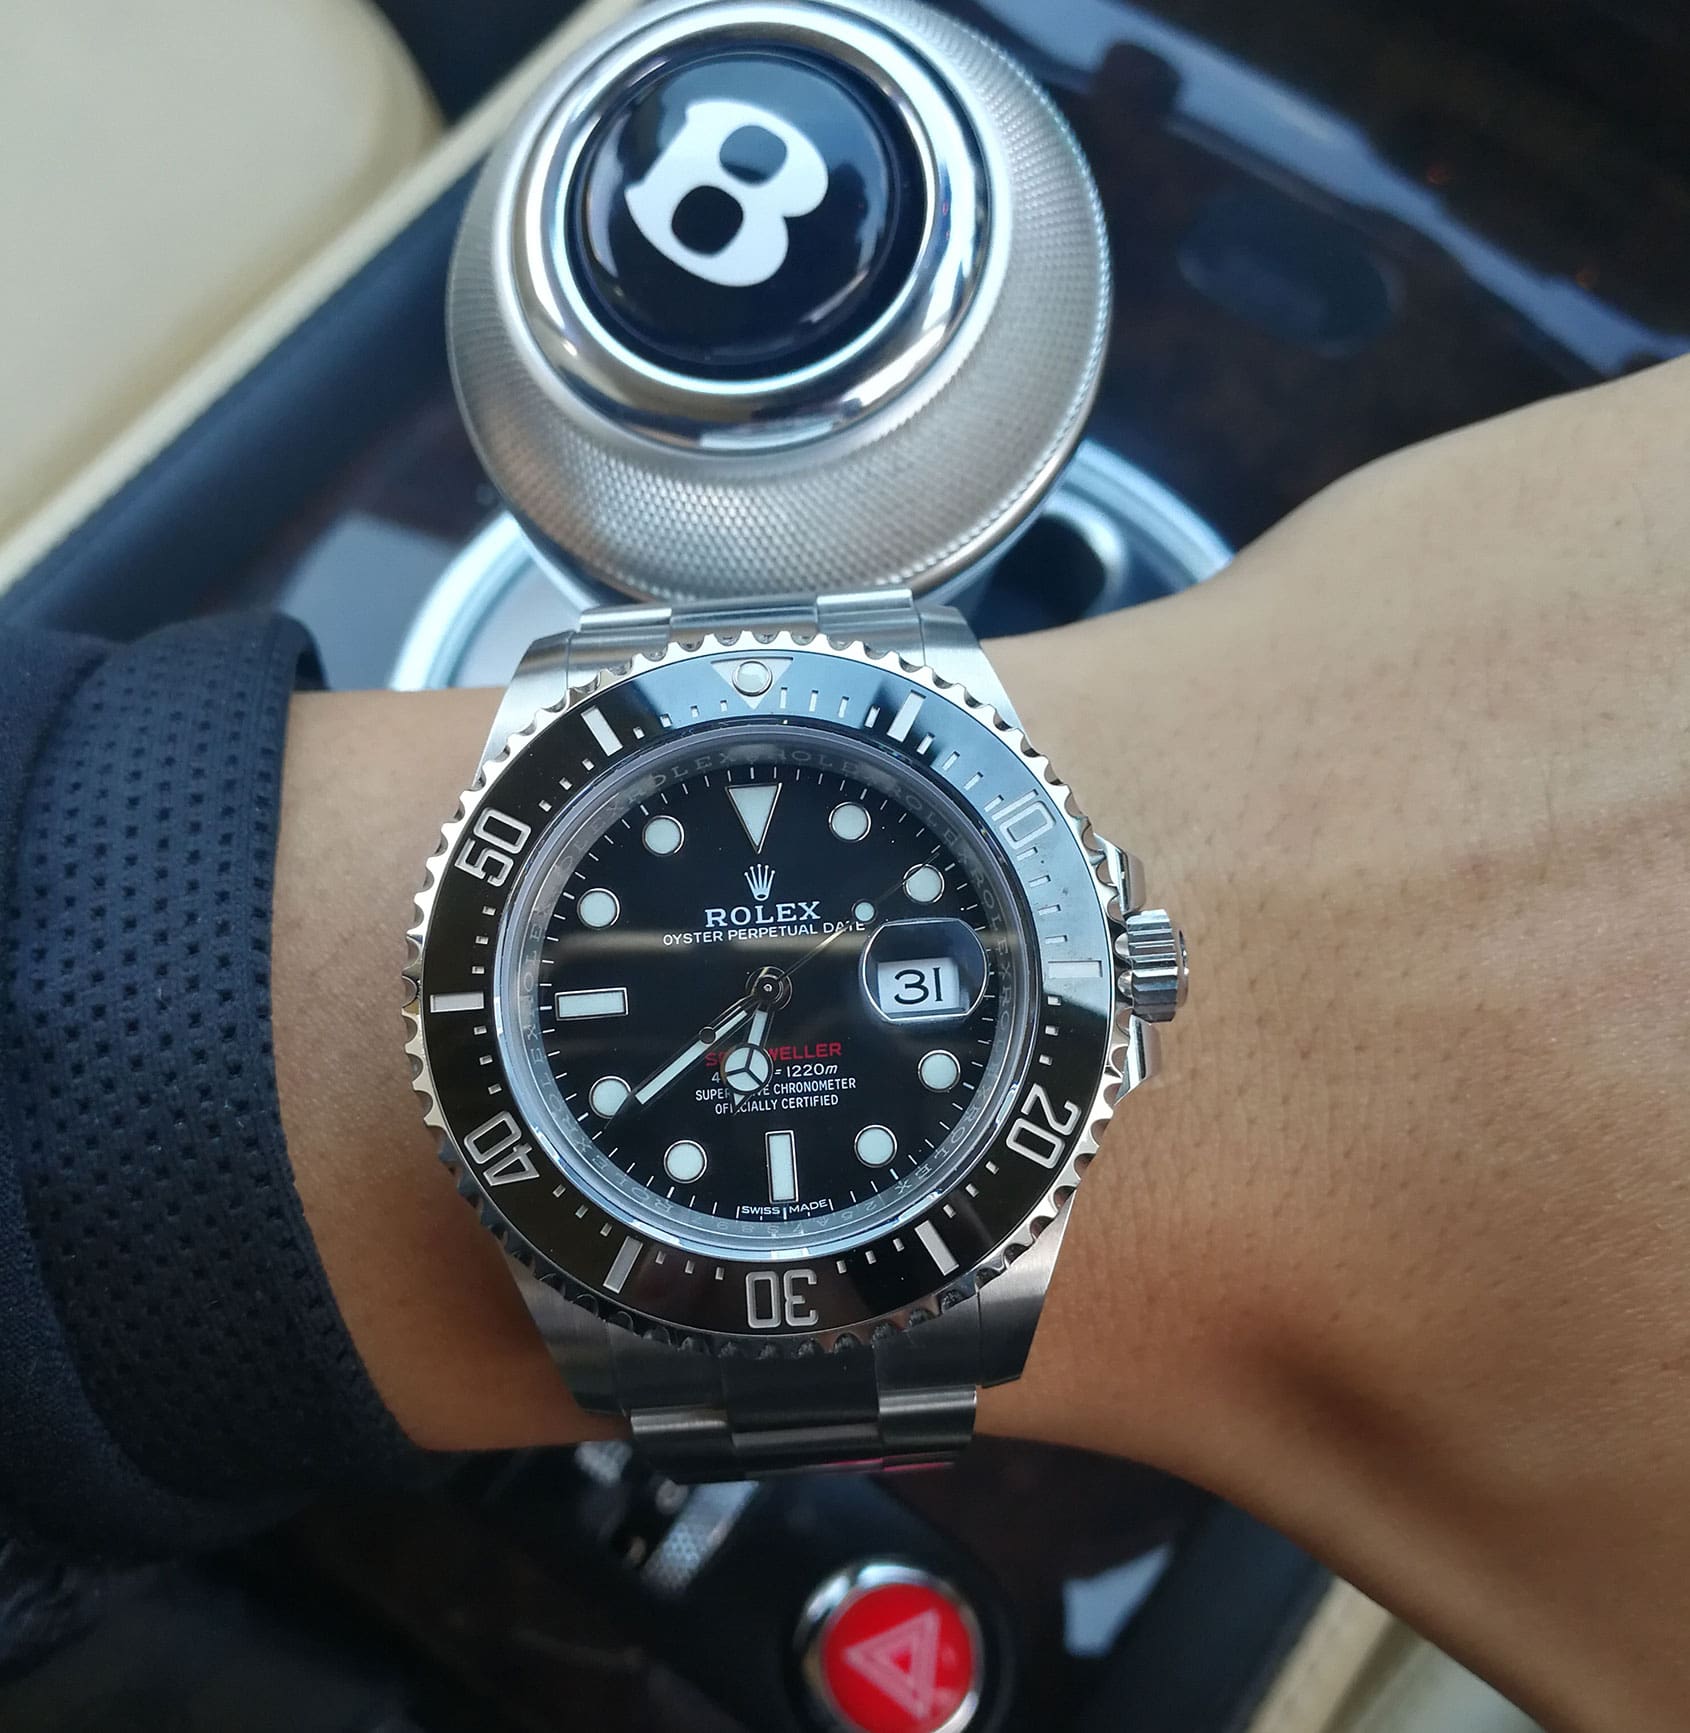 WHY I BOUGHT: The 2017 Rolex Sea-Dweller ref. 126600